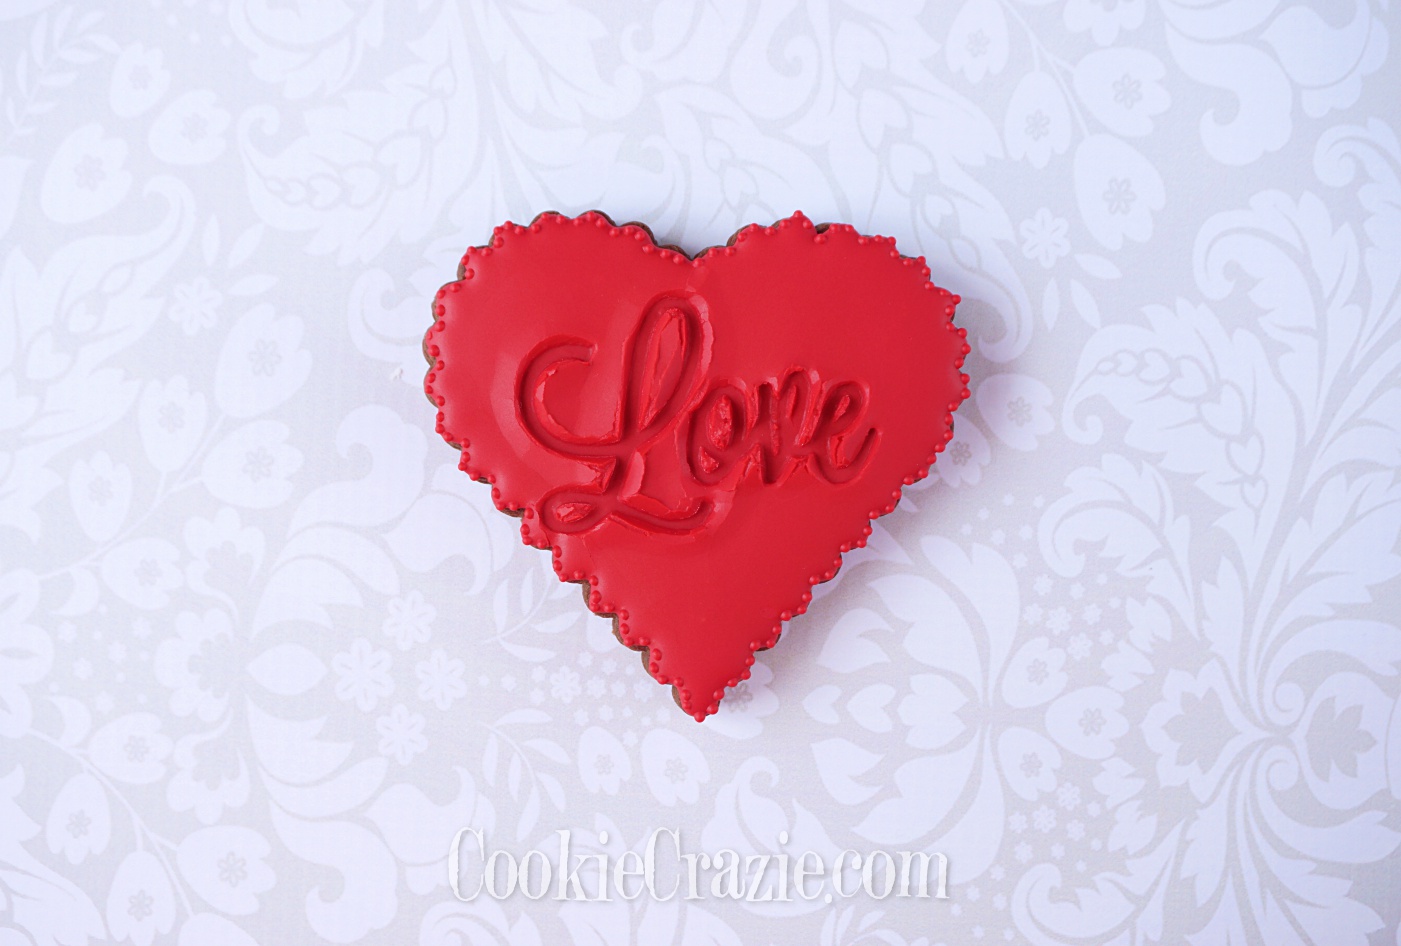  LOVE Valentines Heart Decorated Sugar Cookie YouTube video  HERE  